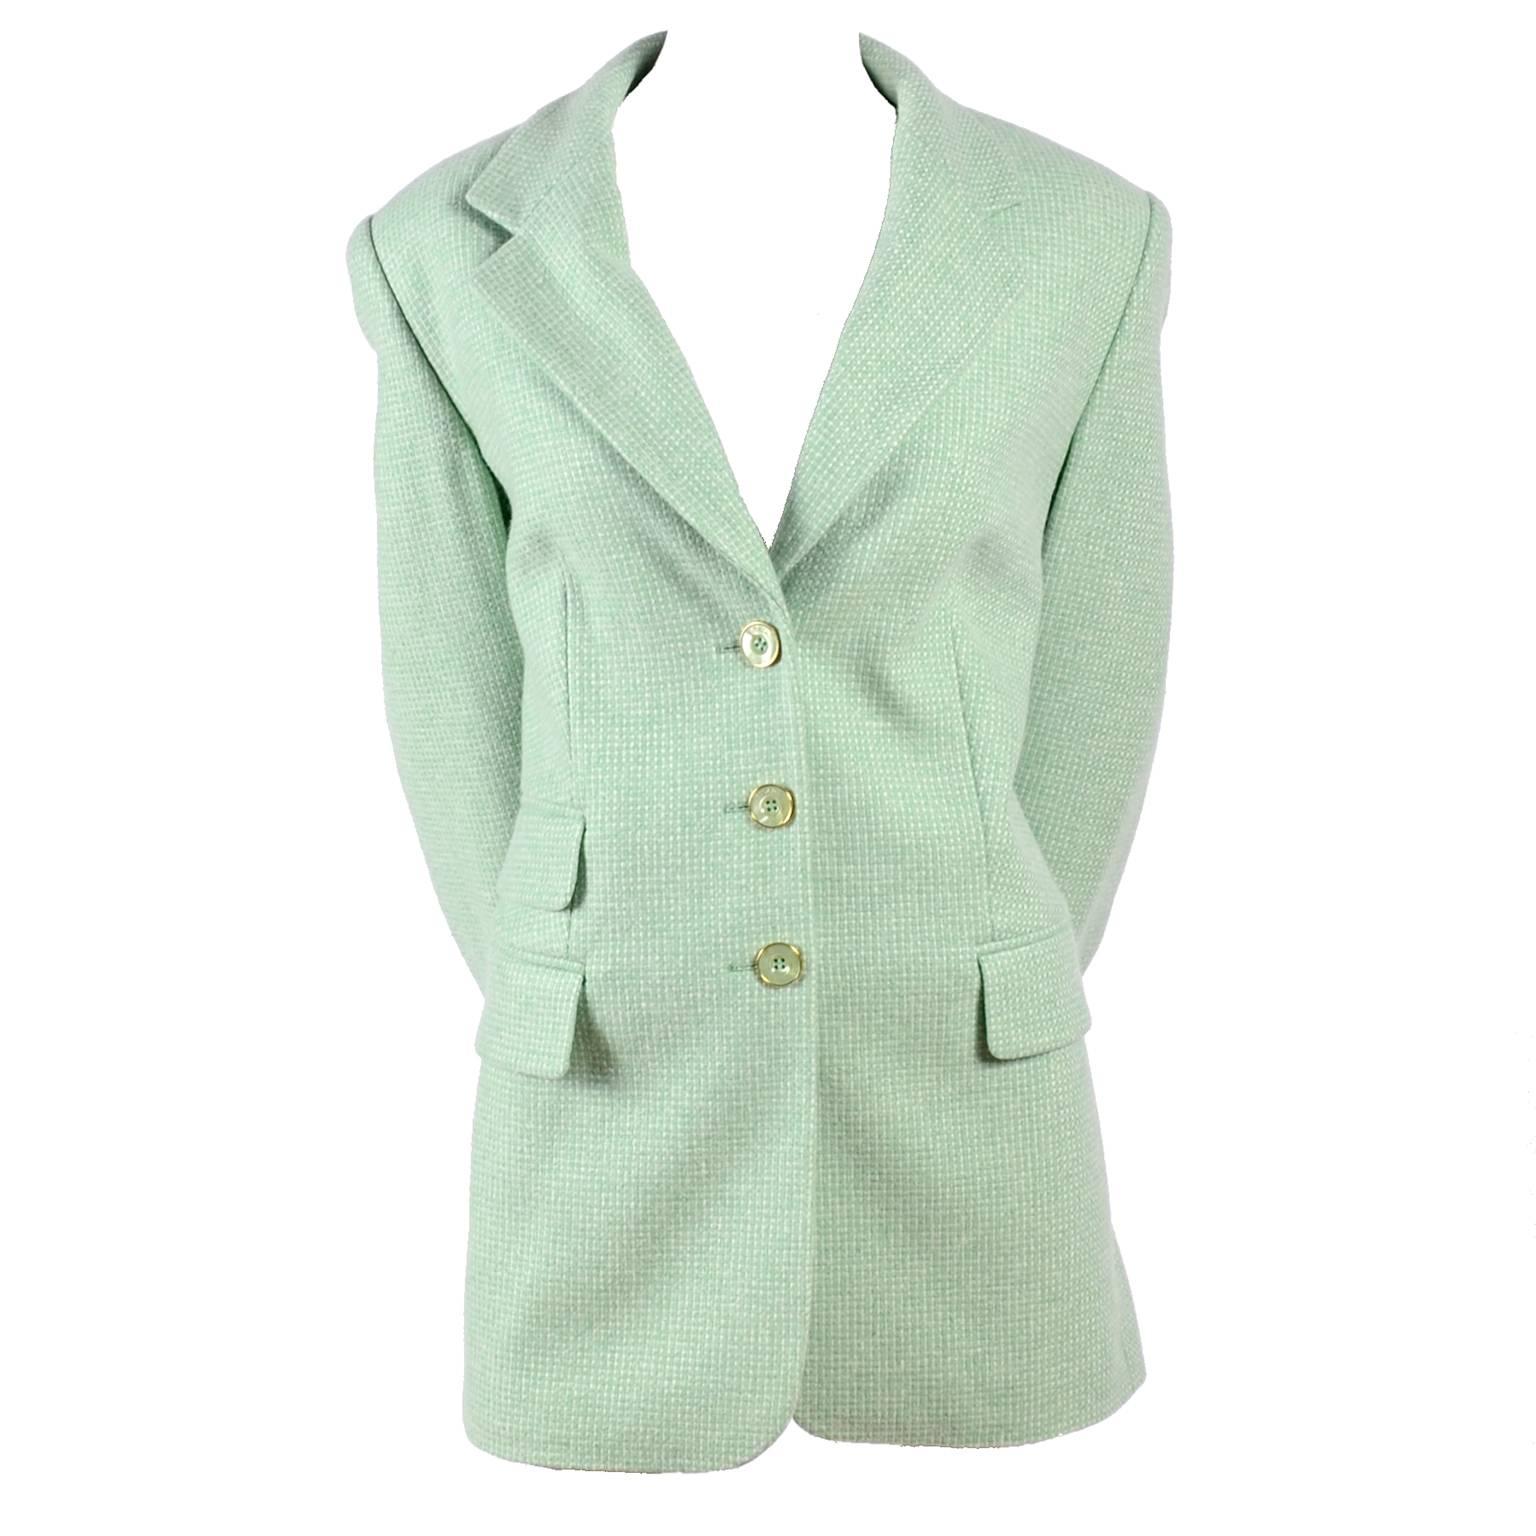 This vintage Escada blazer was designed by Margaretha Ley and is made of 100% cashmere and lined in Escada logo printed green rayon satin. The jacket has 3 Escada marked buttons on the front and 3 of the same green and gold logo buttons on each